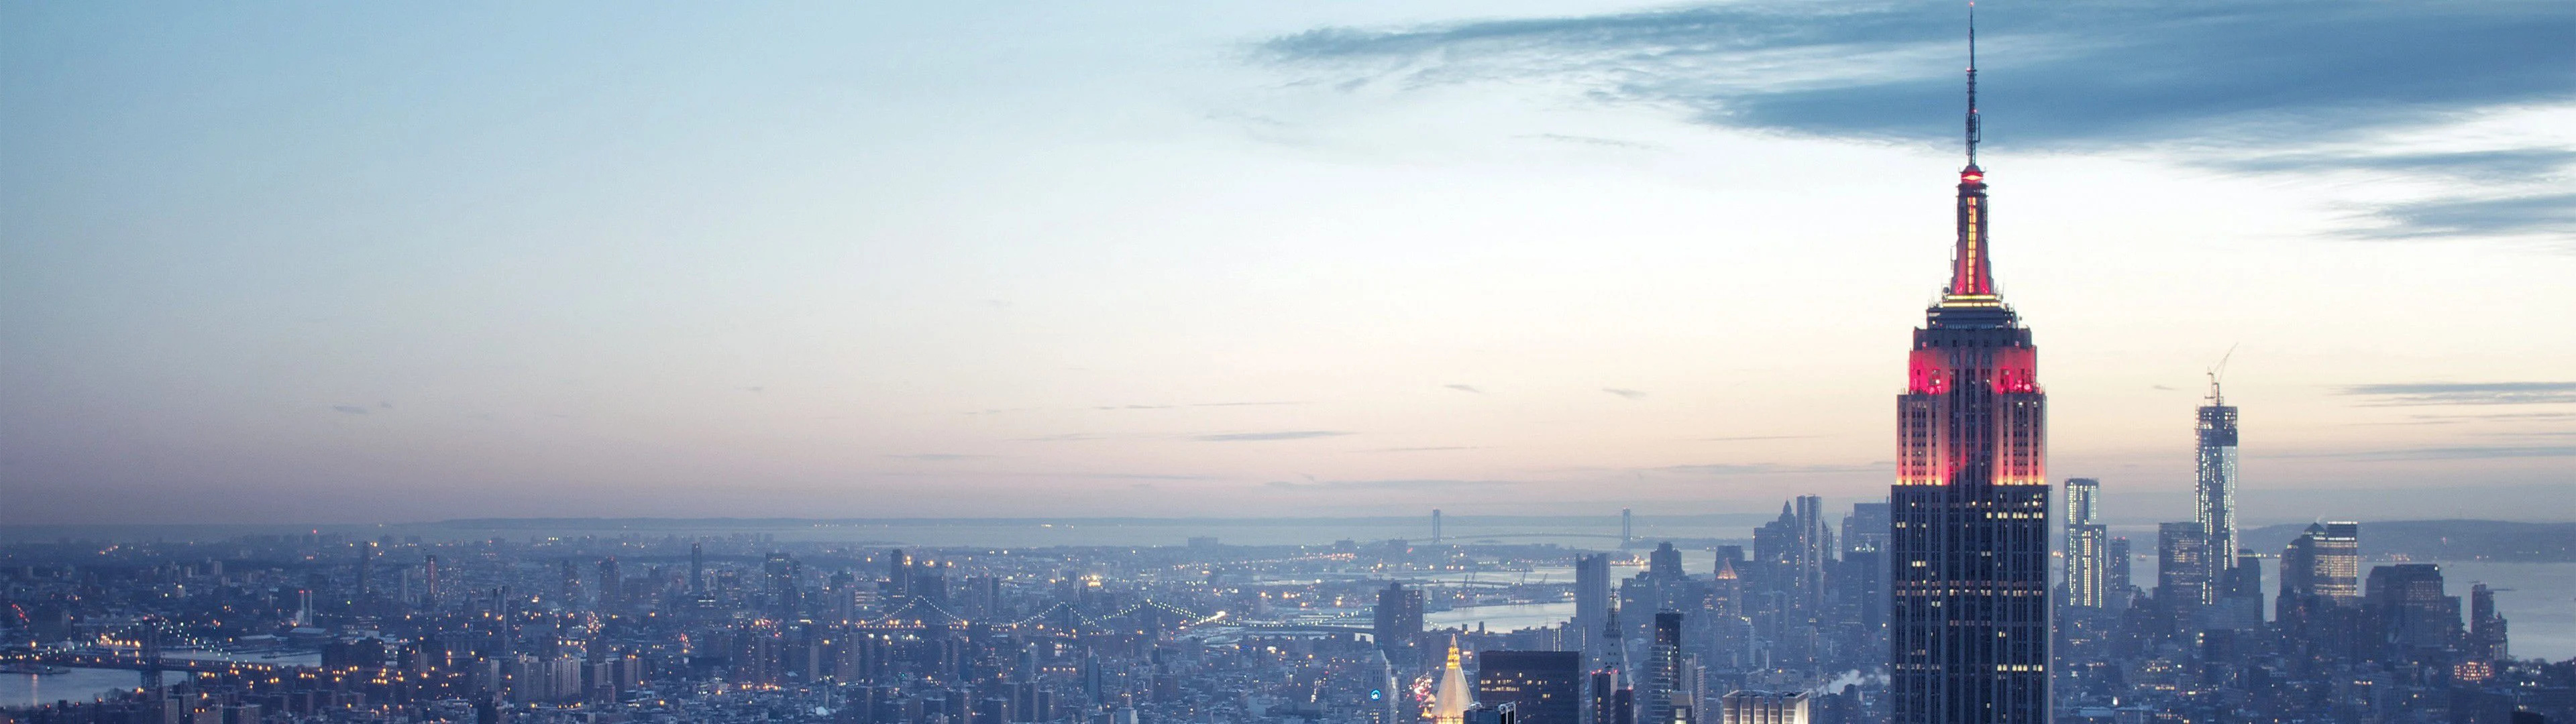 New York: The Capital of the World, Panoramic view. 3840x1080 Dual Screen Wallpaper.